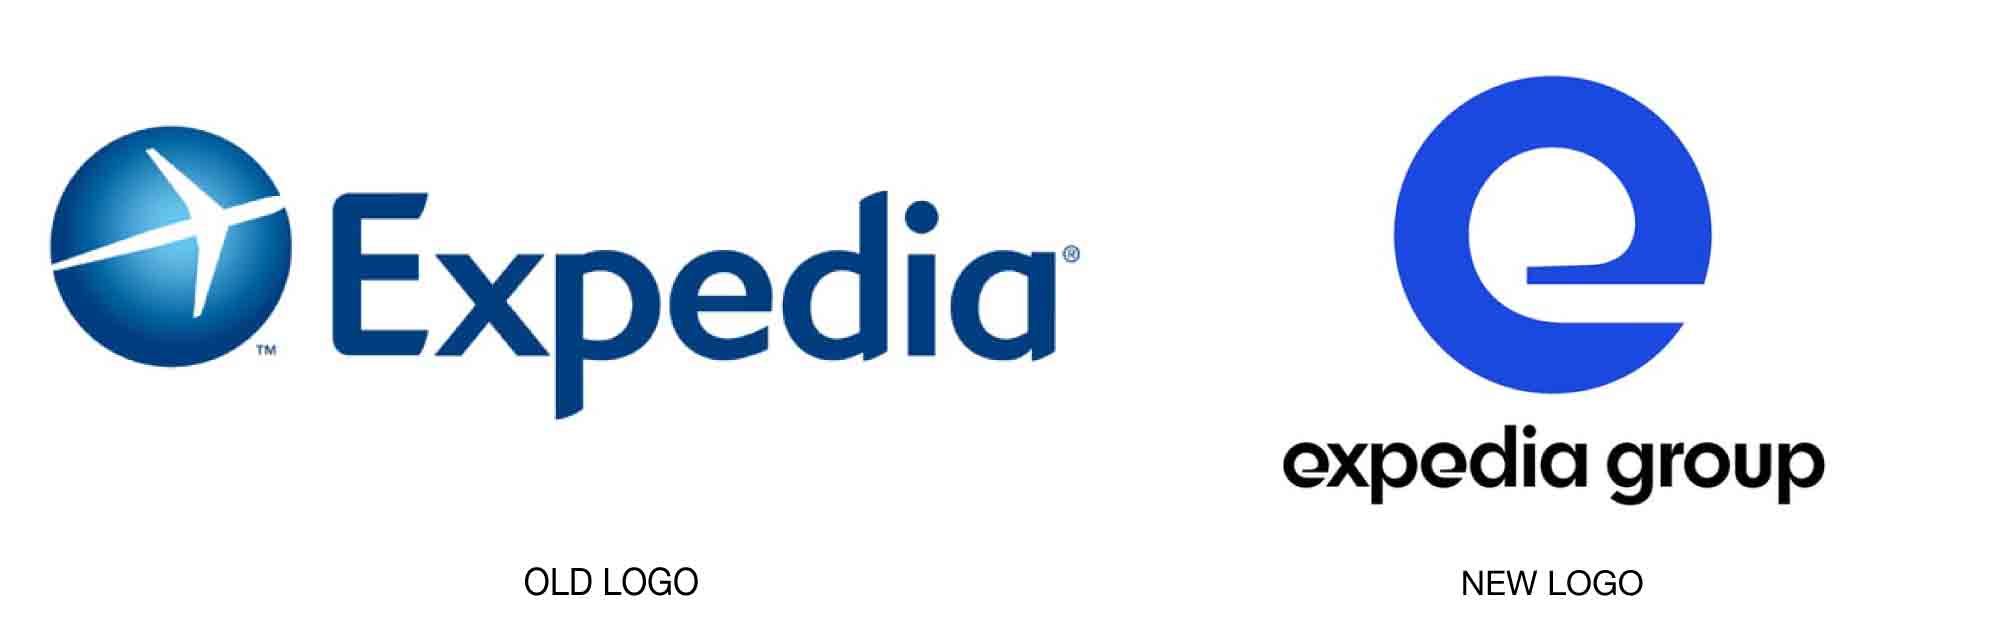 Expedia Group Logo - Expedia Repositions | Articles | LogoLounge